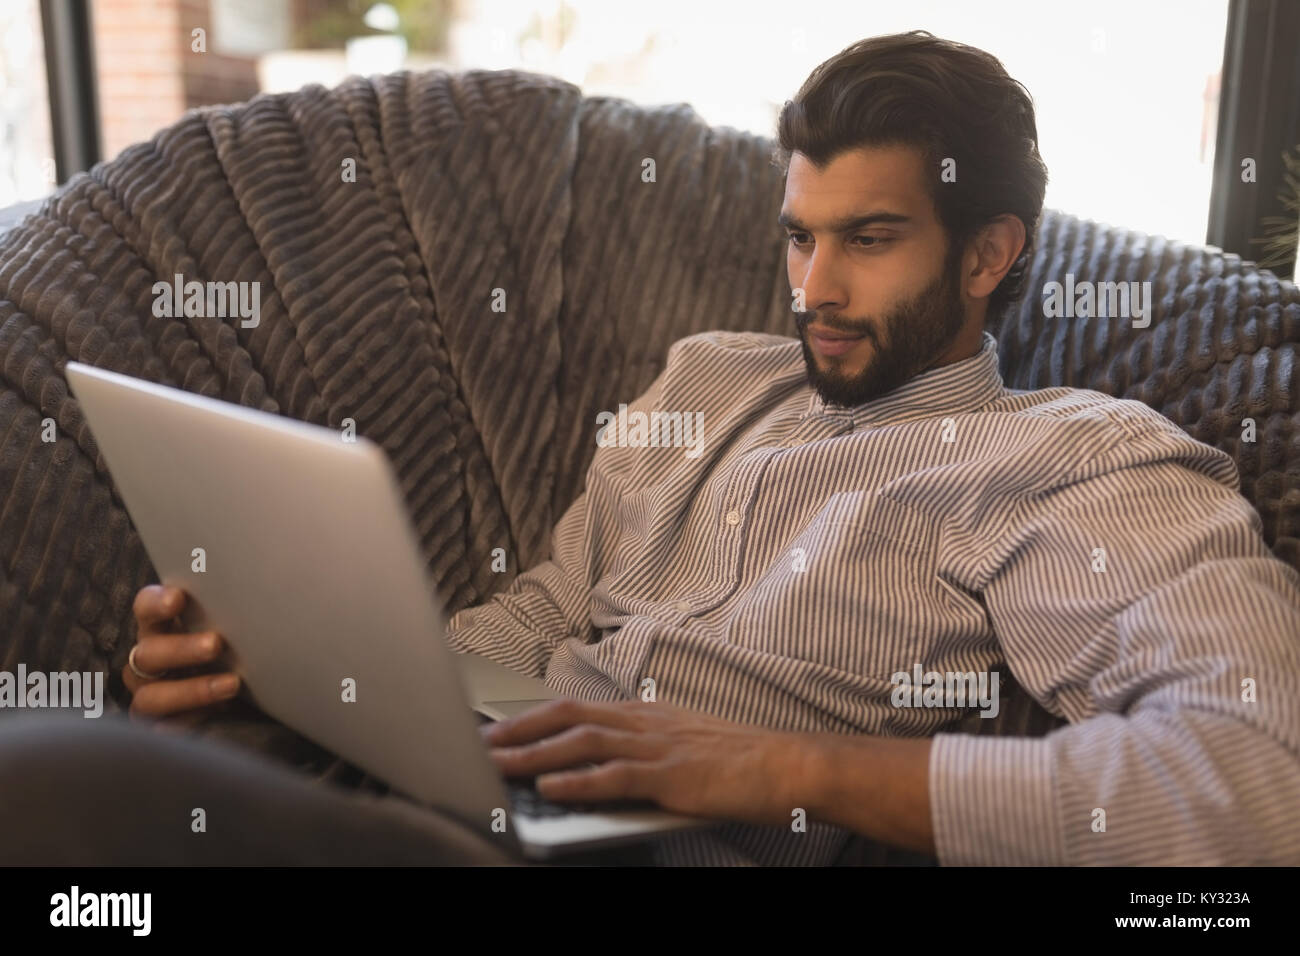 Man using laptop while relaxing on arm chair Stock Photo